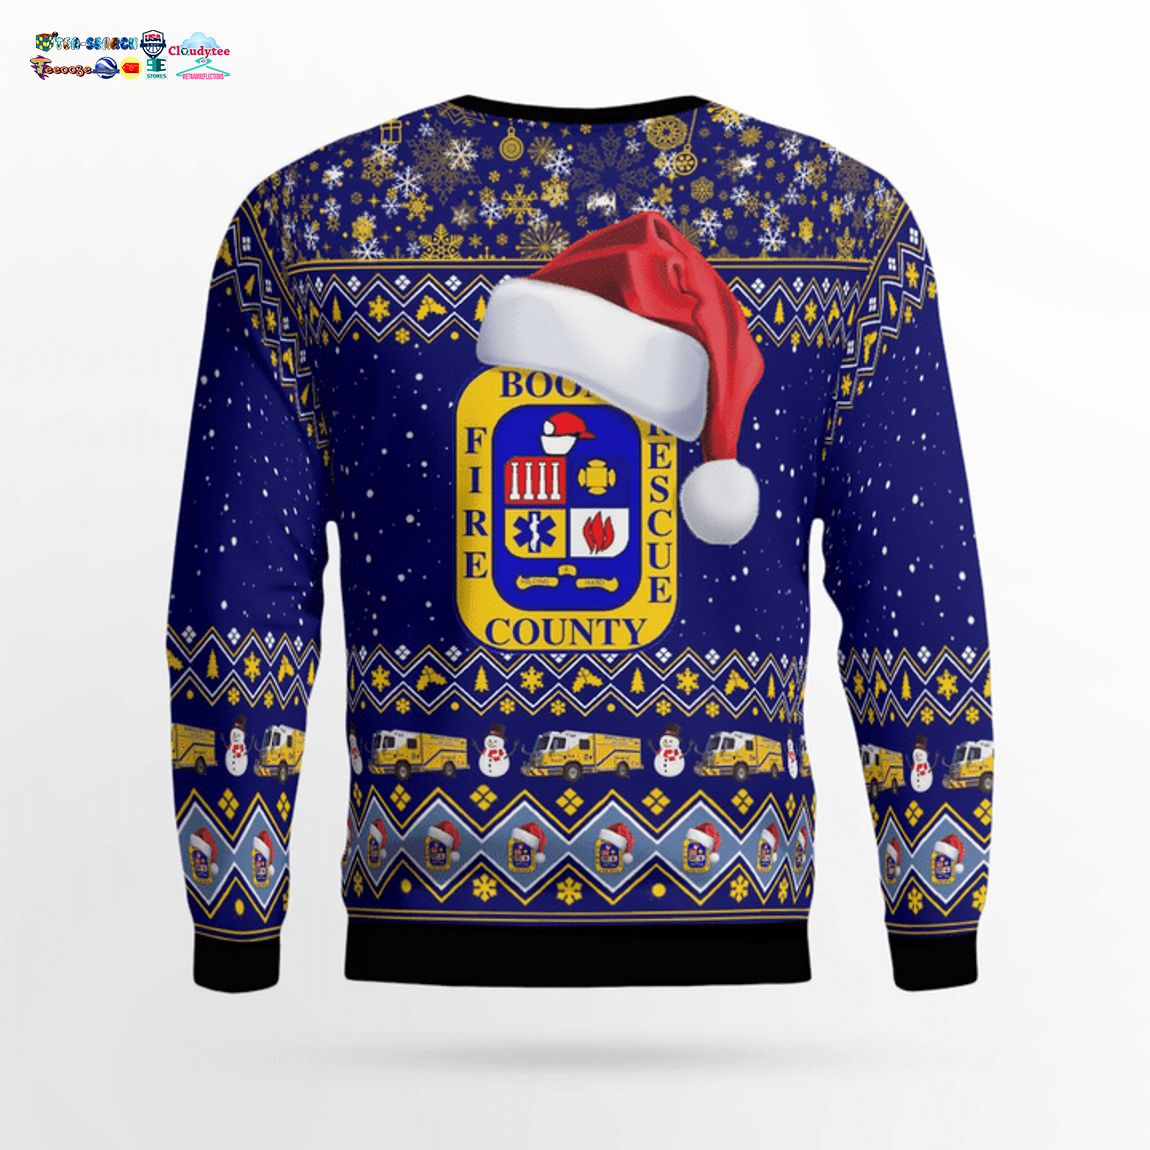 Boone County Fire Protection District Ver 2 3D Christmas Sweater - Saleoff